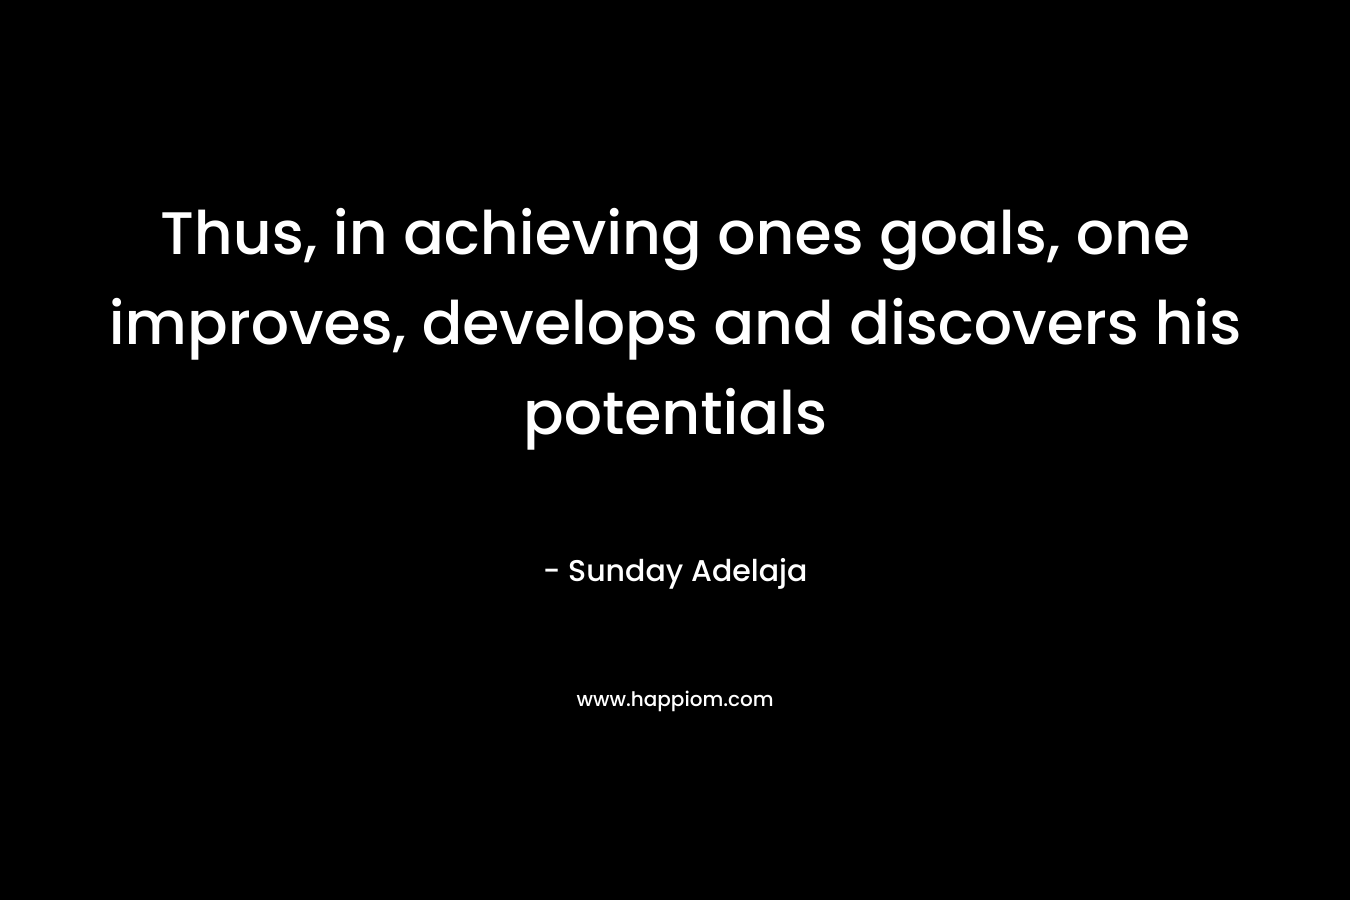 Thus, in achieving ones goals, one improves, develops and discovers his potentials – Sunday Adelaja